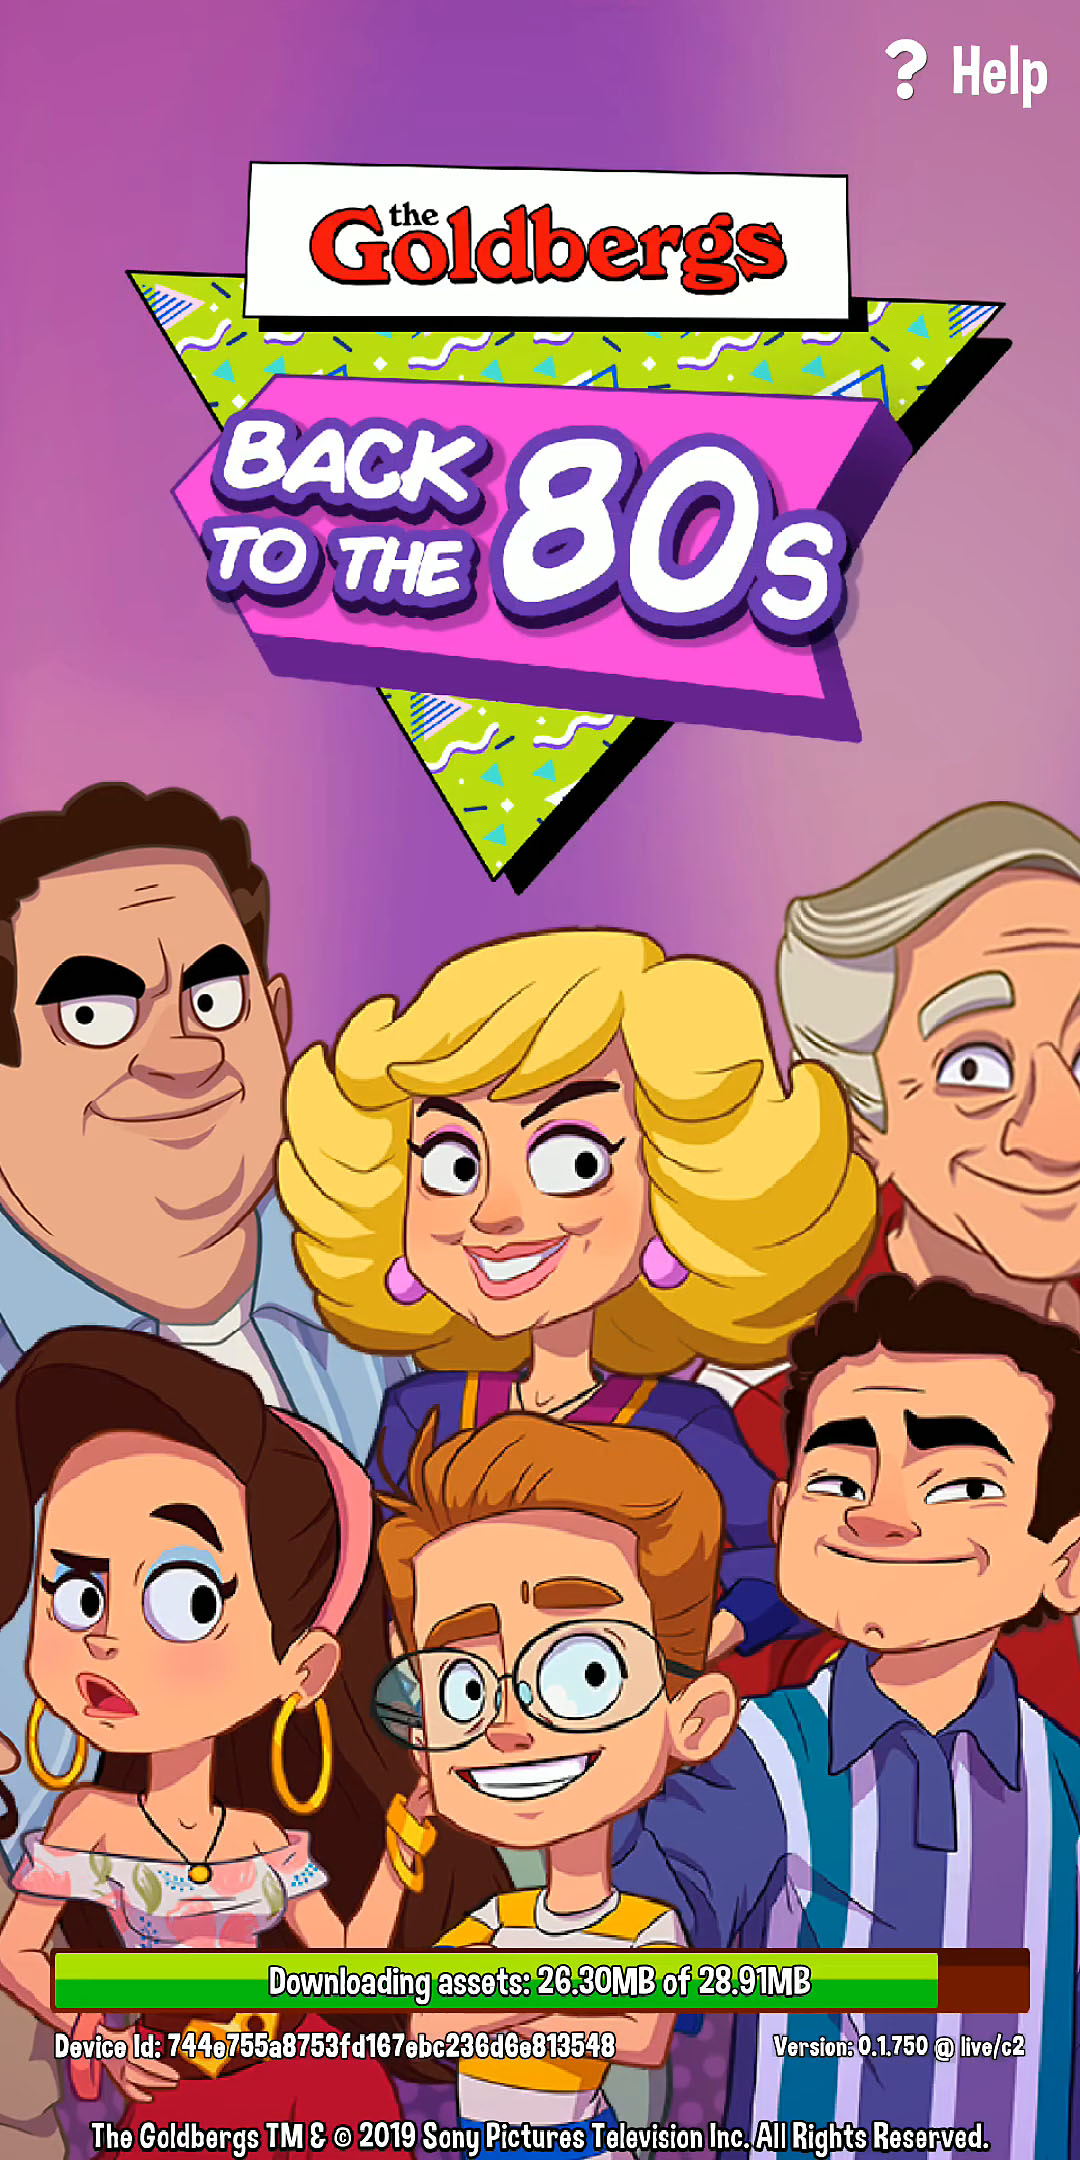 The Goldbergs: Back to the 80s for Android